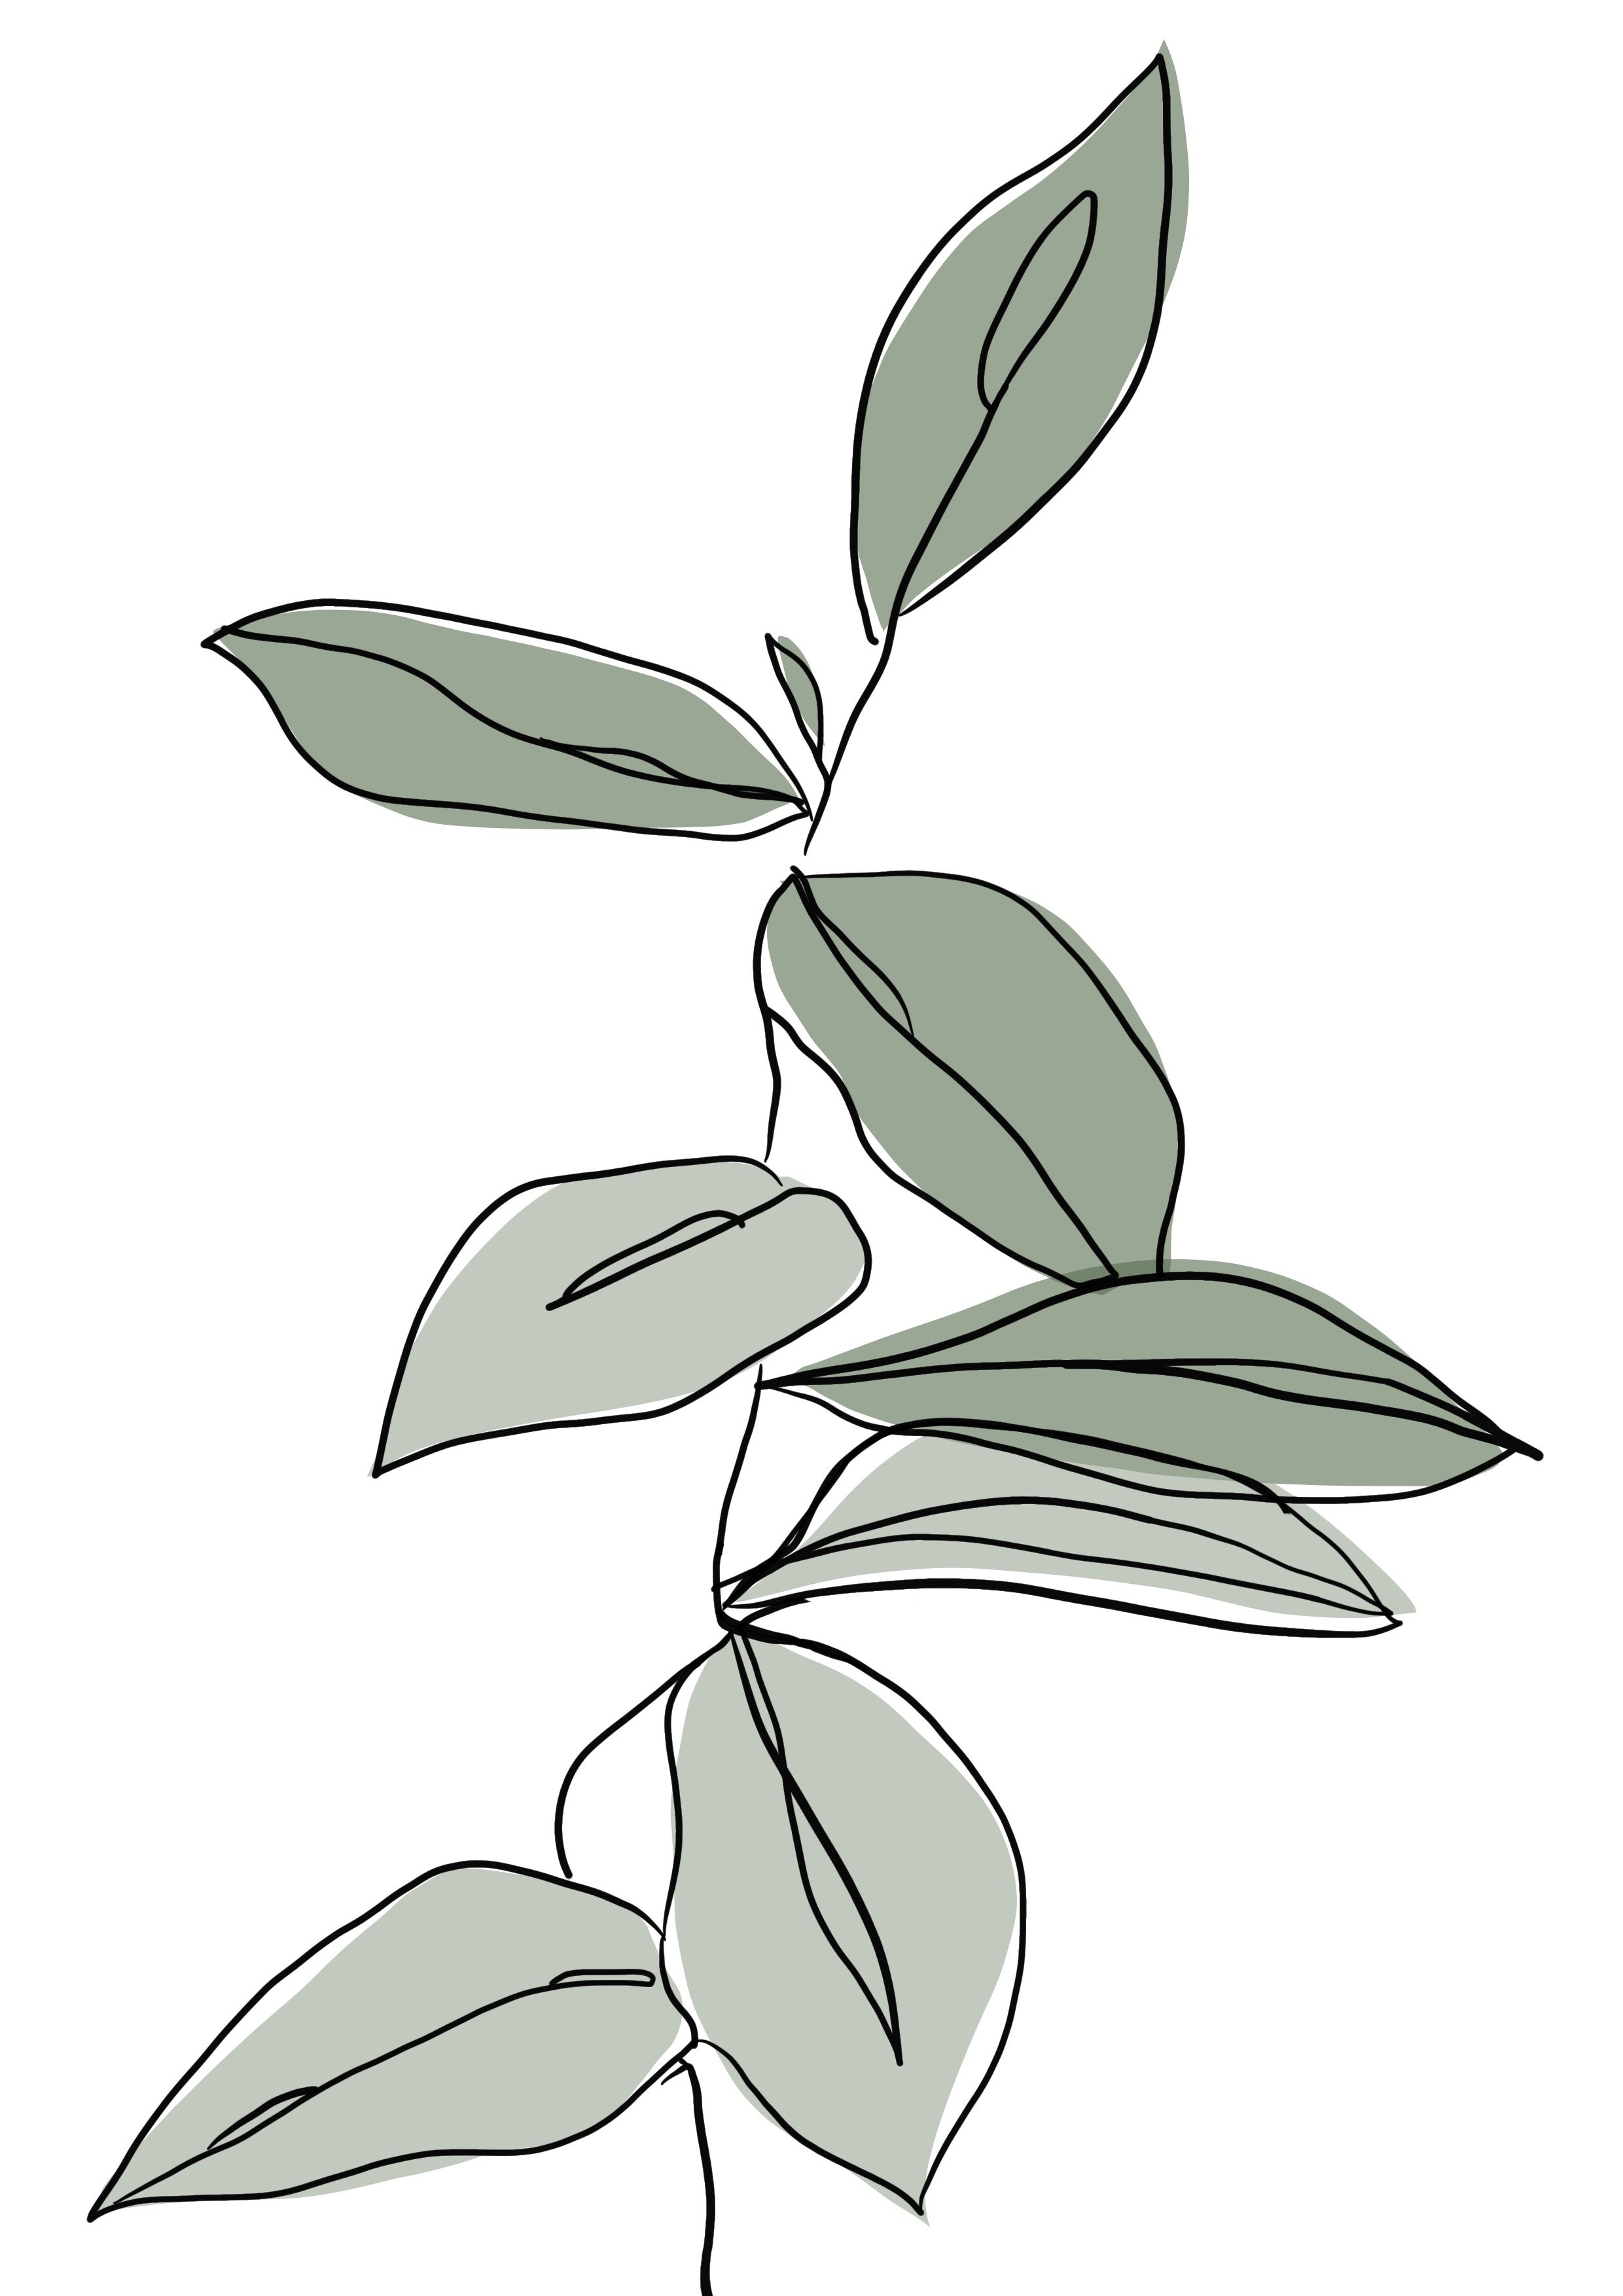 A drawing of a plant with leaves - Botanical